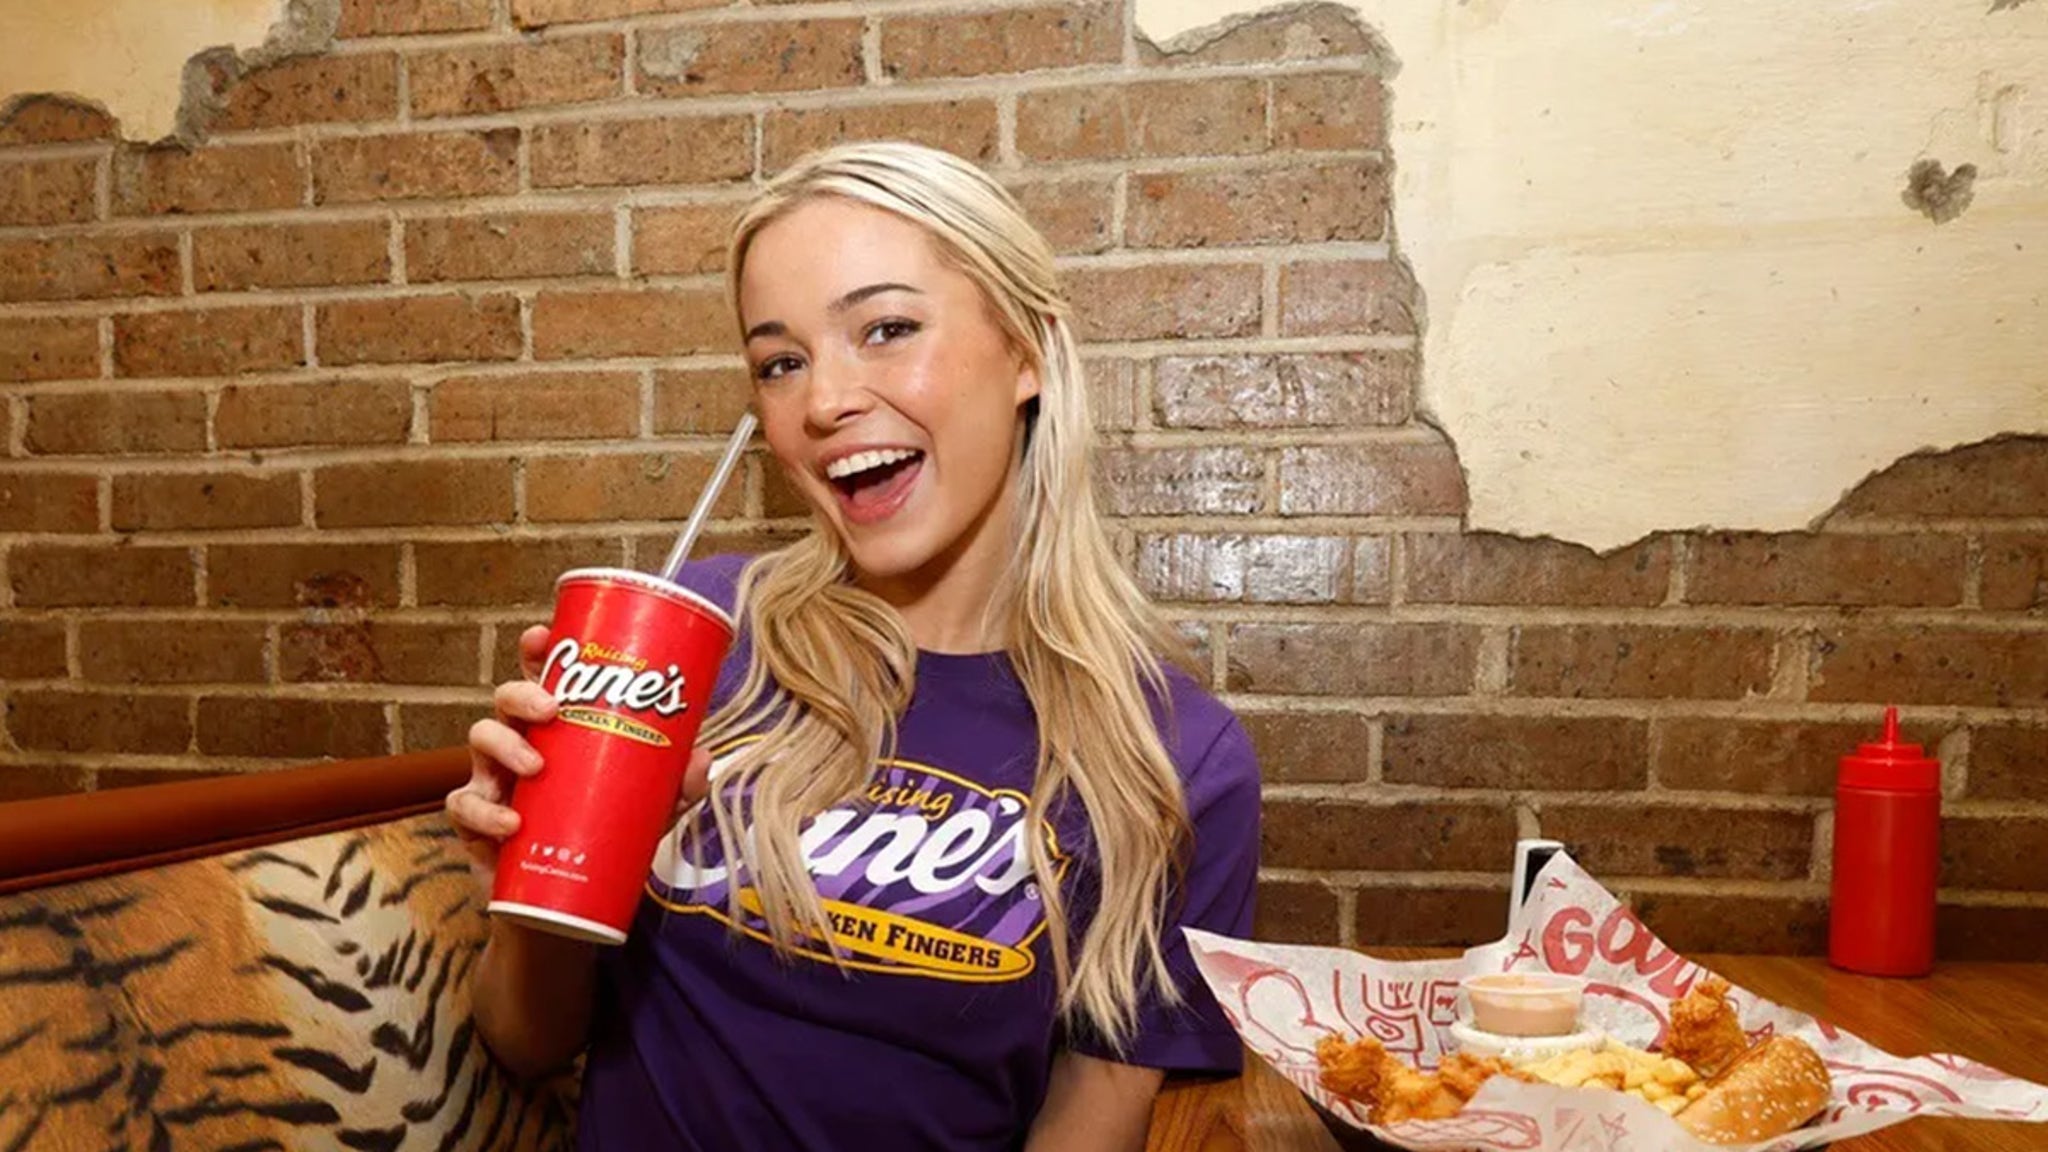 Livvy Dunne, LSU Gymnasts Attract Crowd At Raising Cane’s After NCAA Title